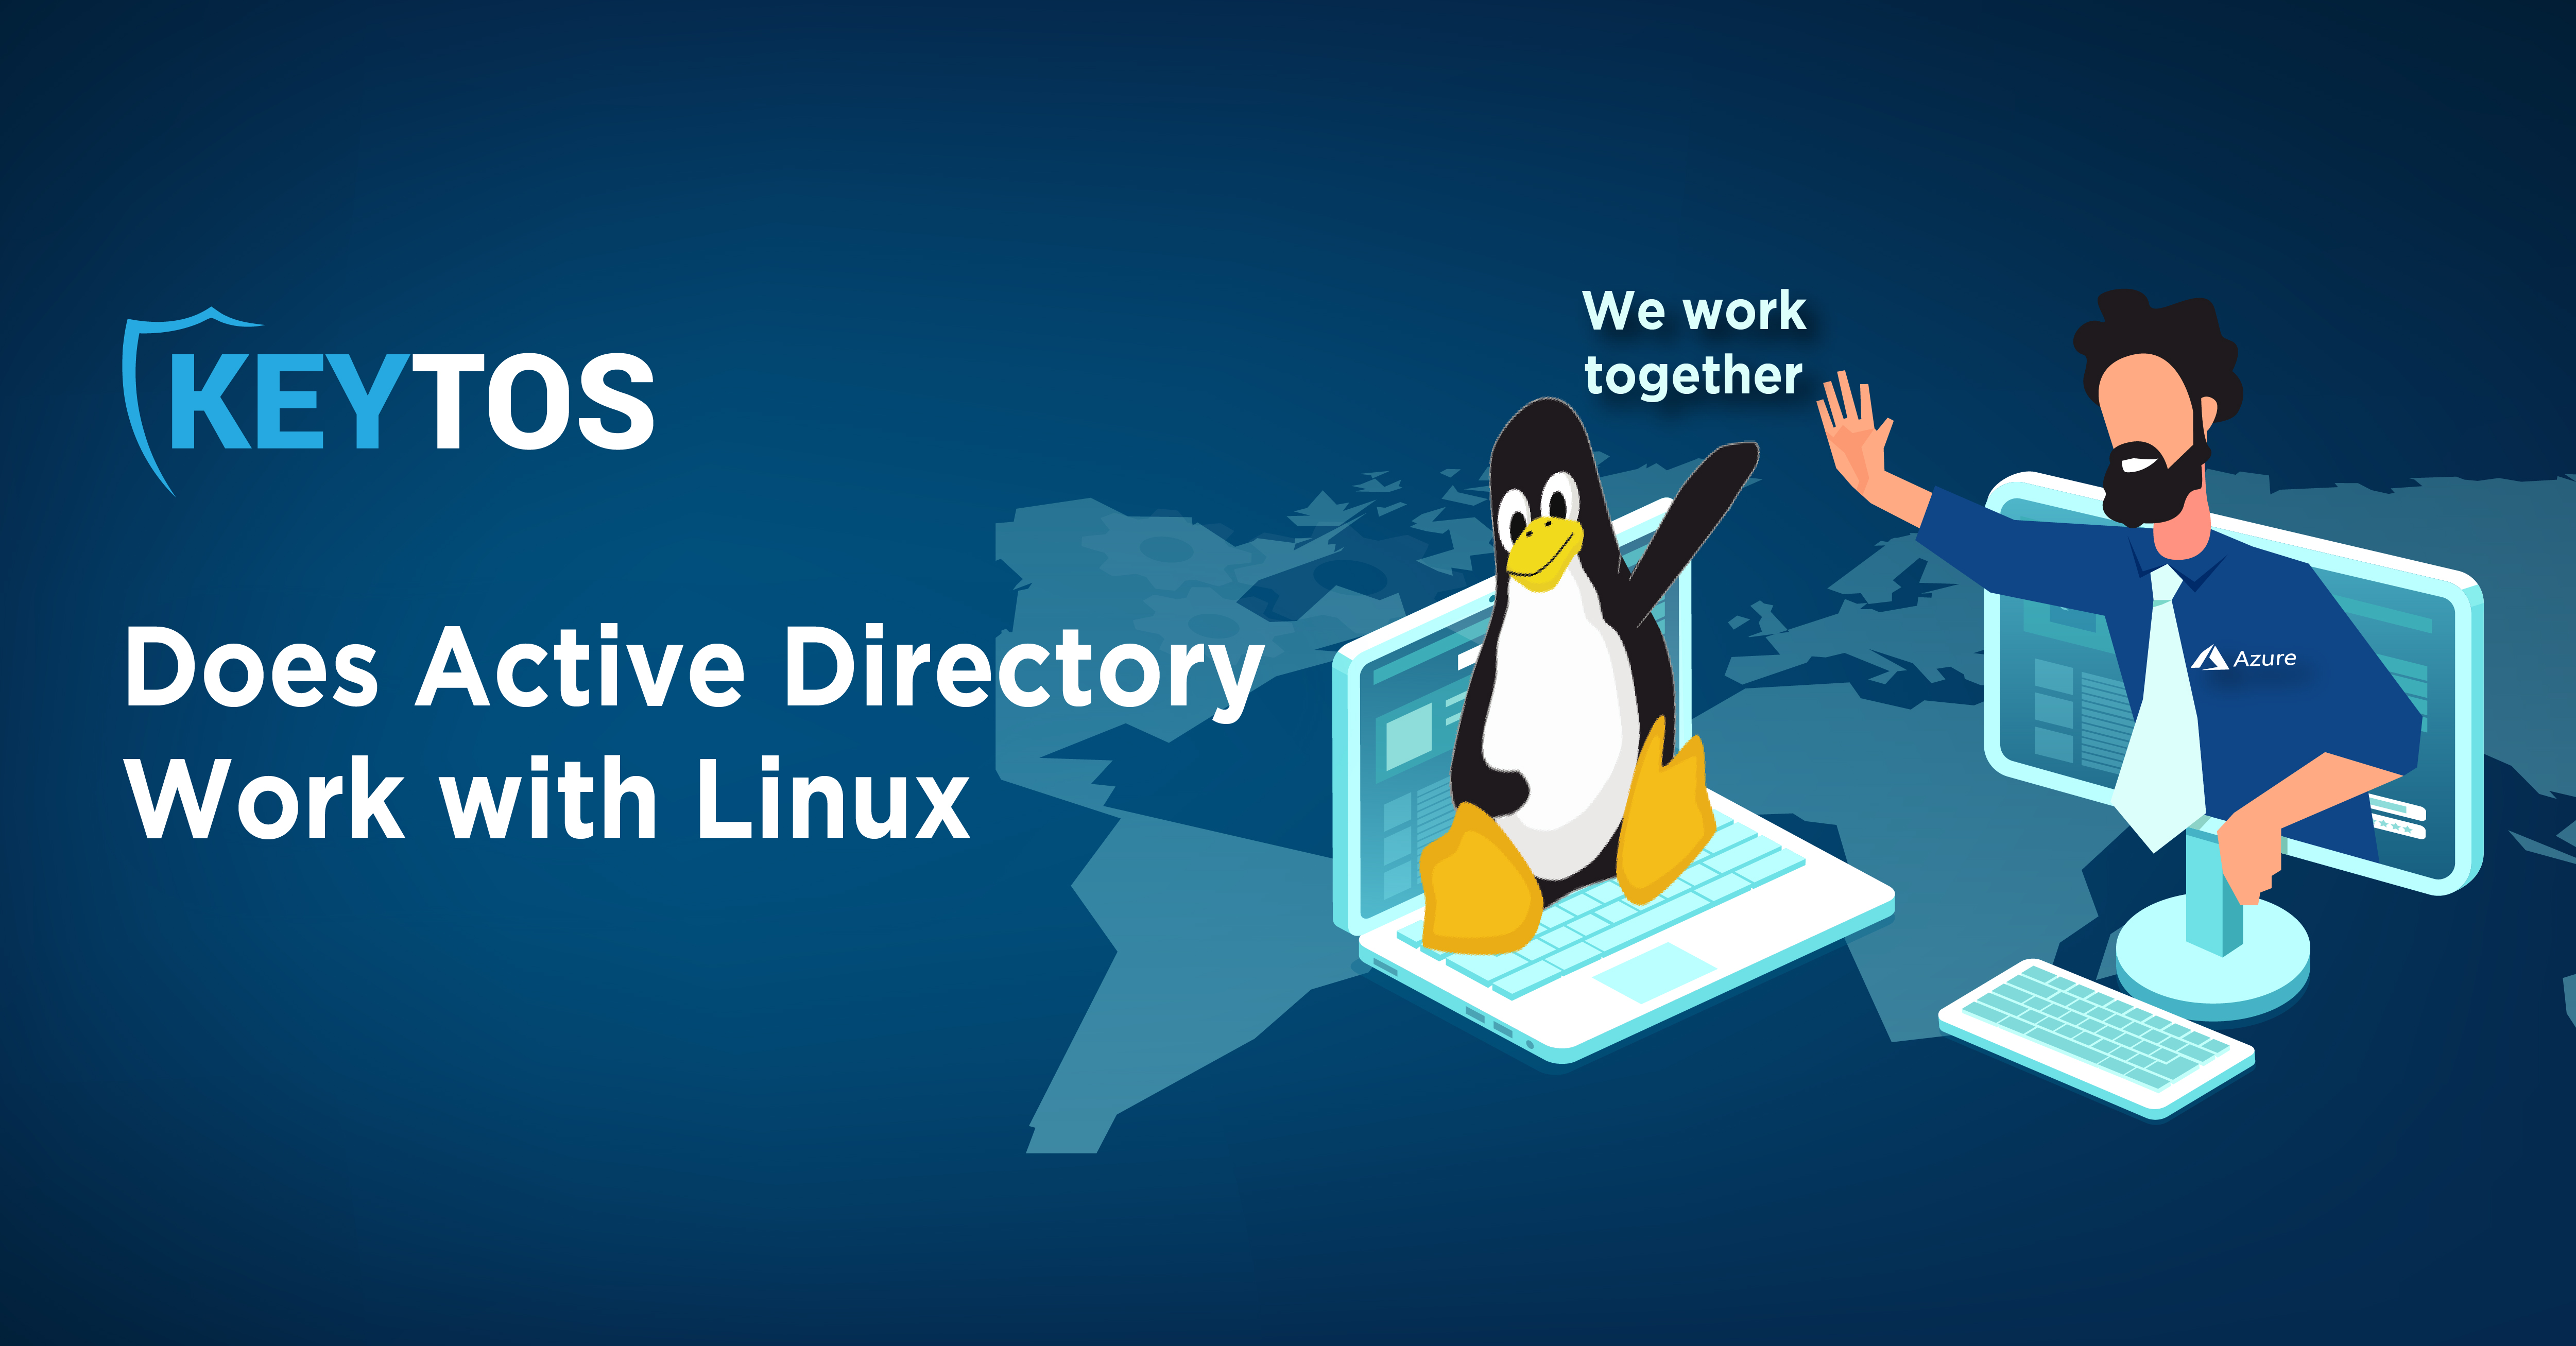 Does Active Directory Work with Linux?